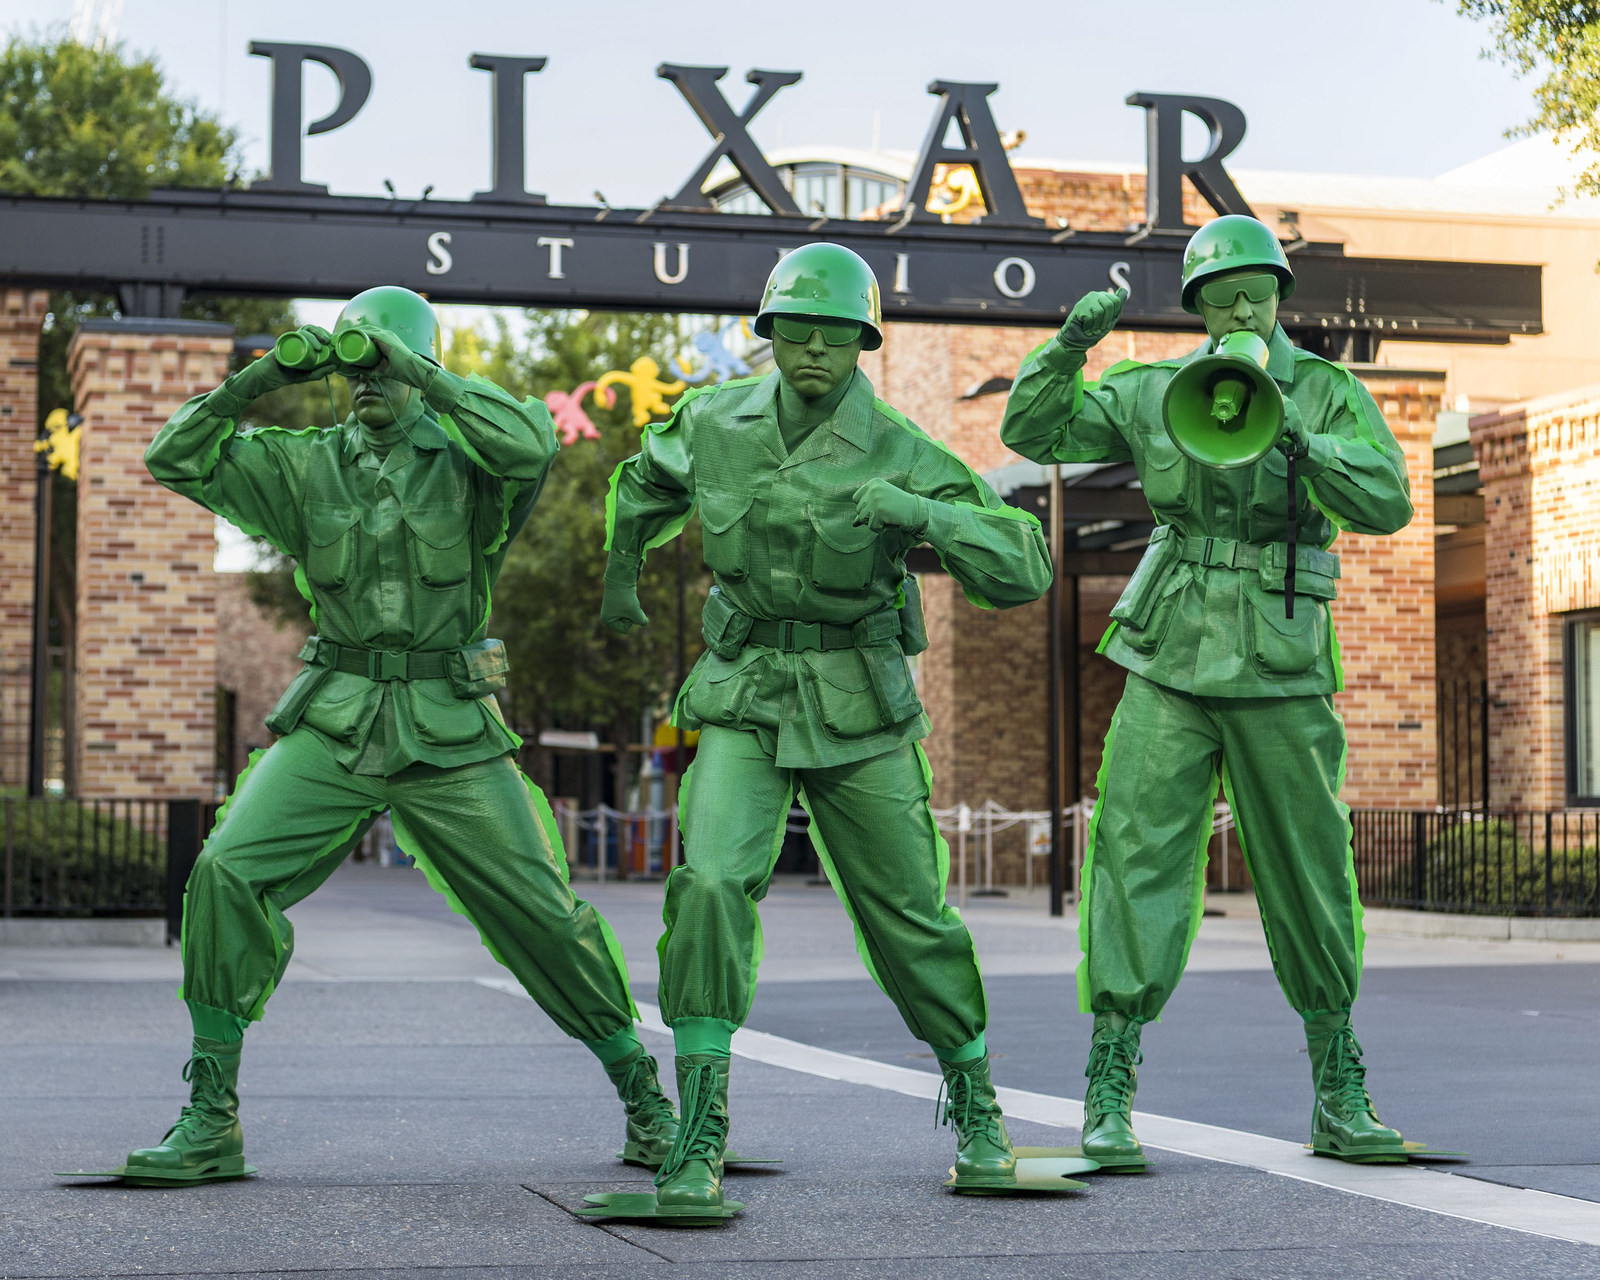 Sarge and the Green Army Men from the hit DisneyPixar "Toy Story" films will interact with guests in the new Toy Story Land 